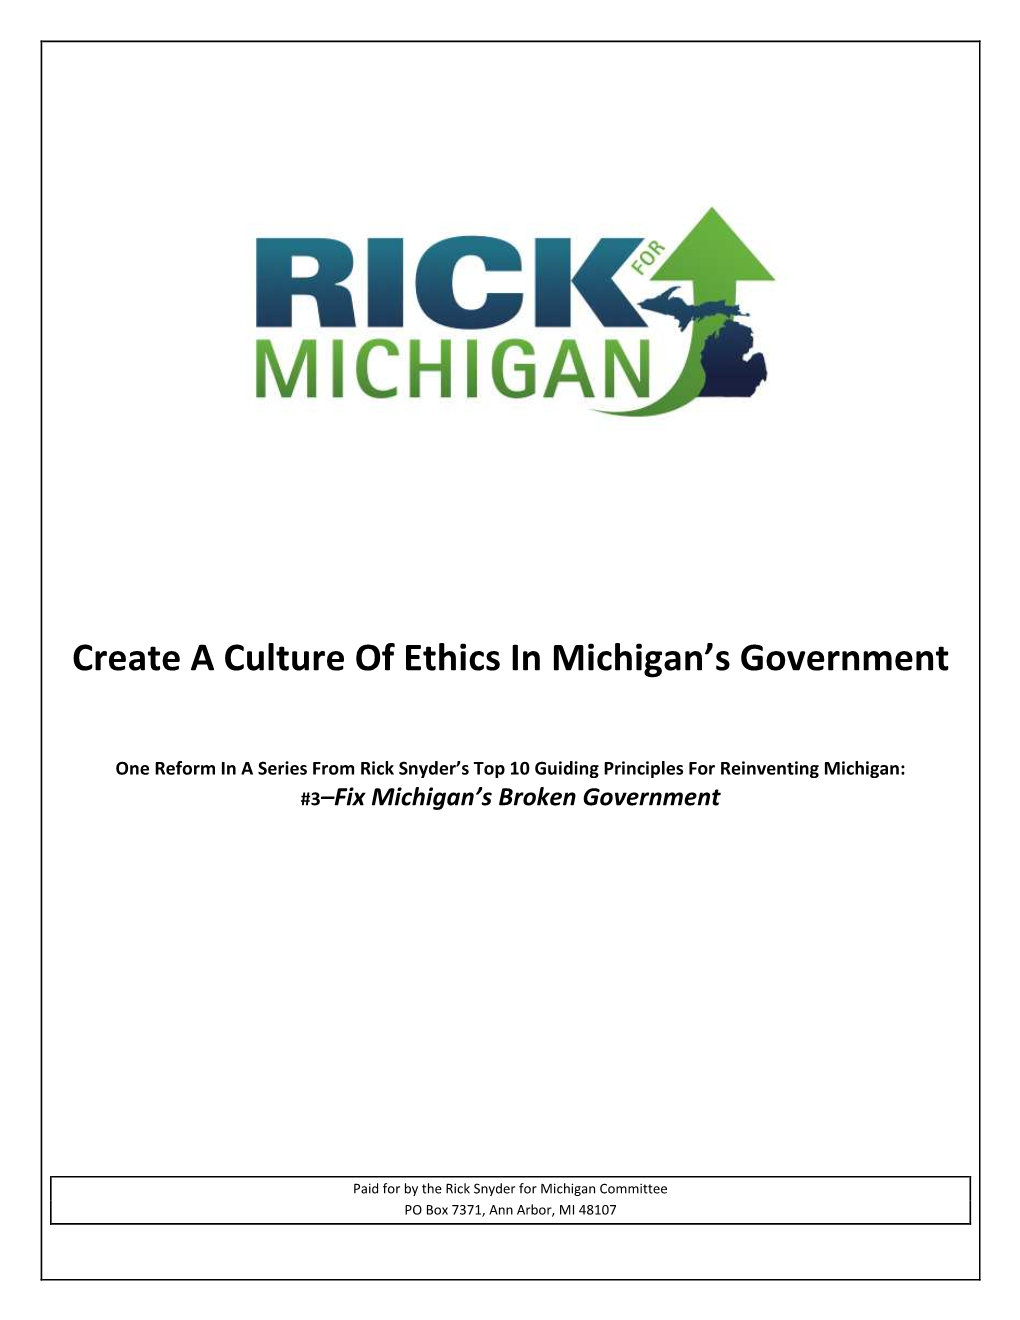 Create a Culture of Ethics in Michigan's Government